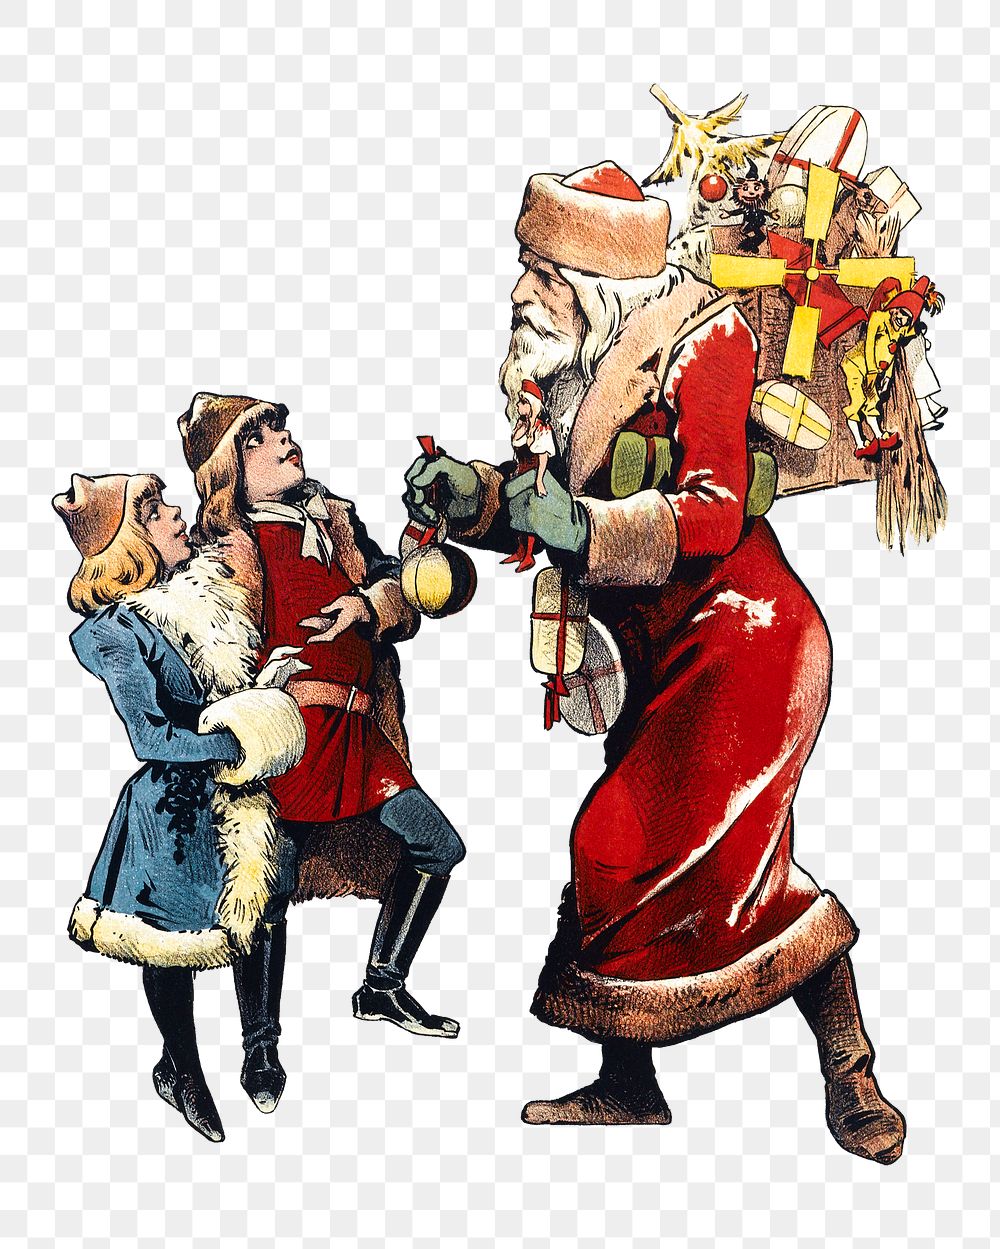 PNG Santa Claus and two children, vintage Christmas illustration, transparent background. Remixed by rawpixel.